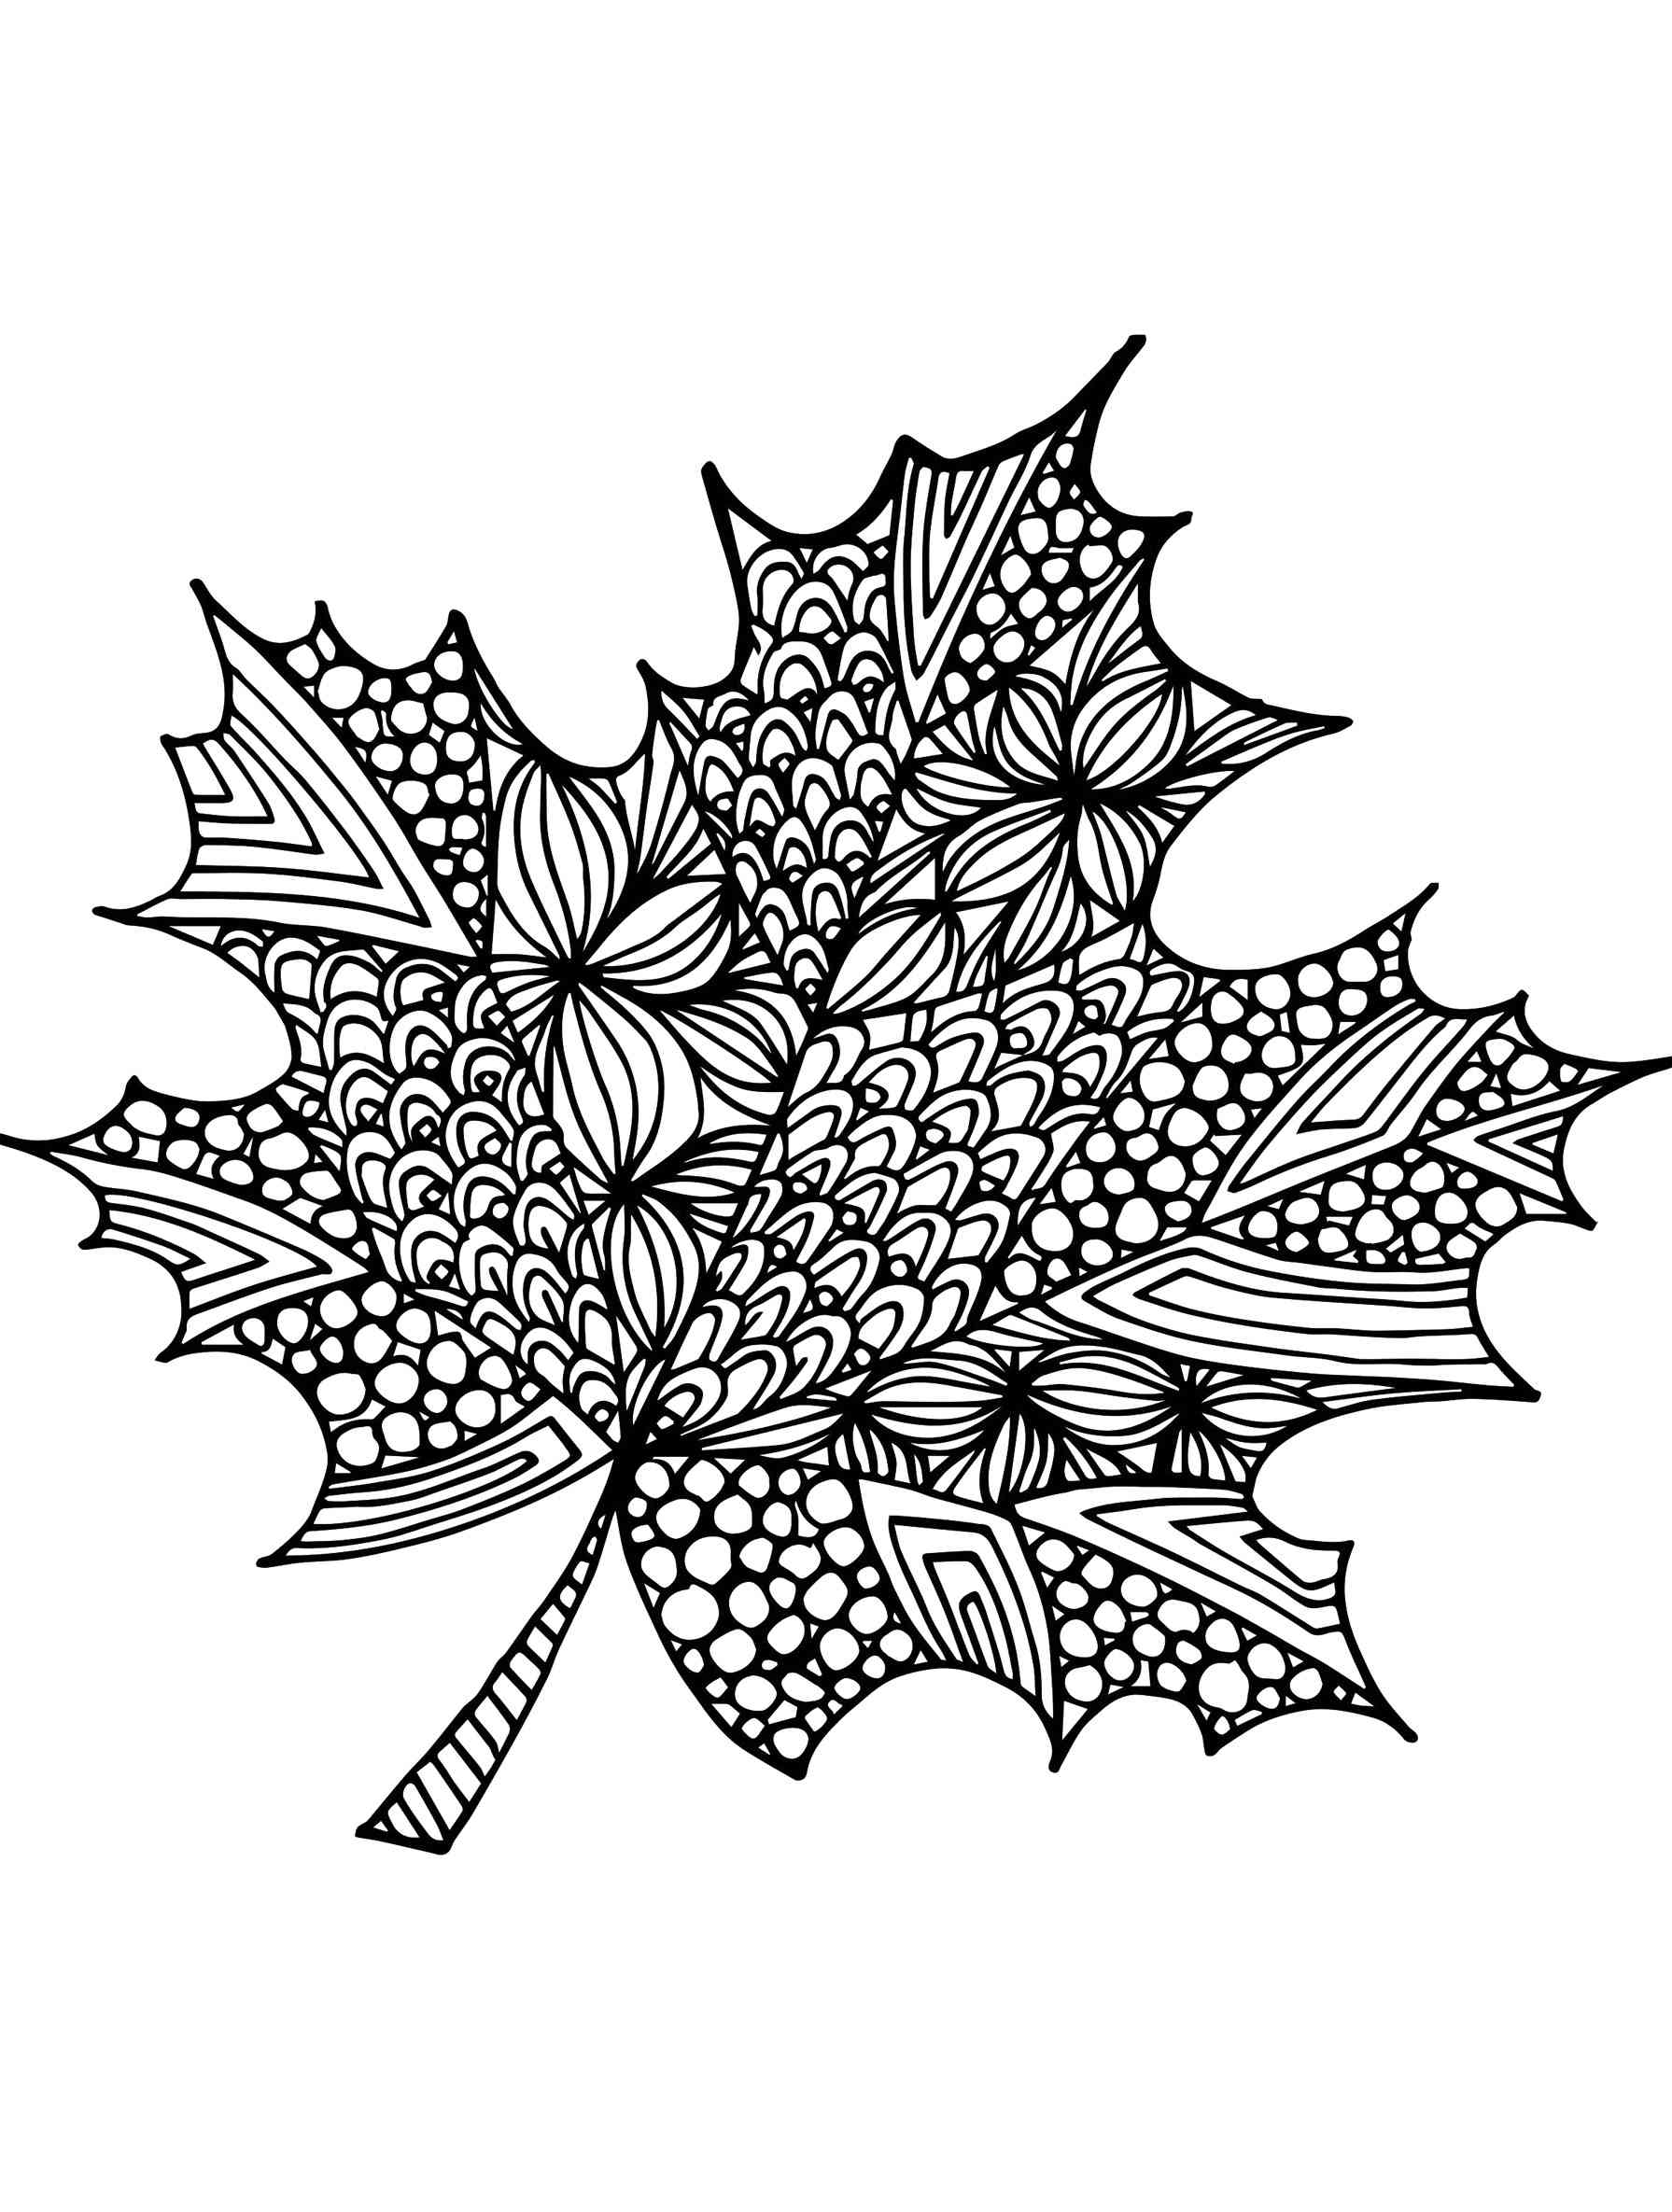 Leaves coloring pages for adults